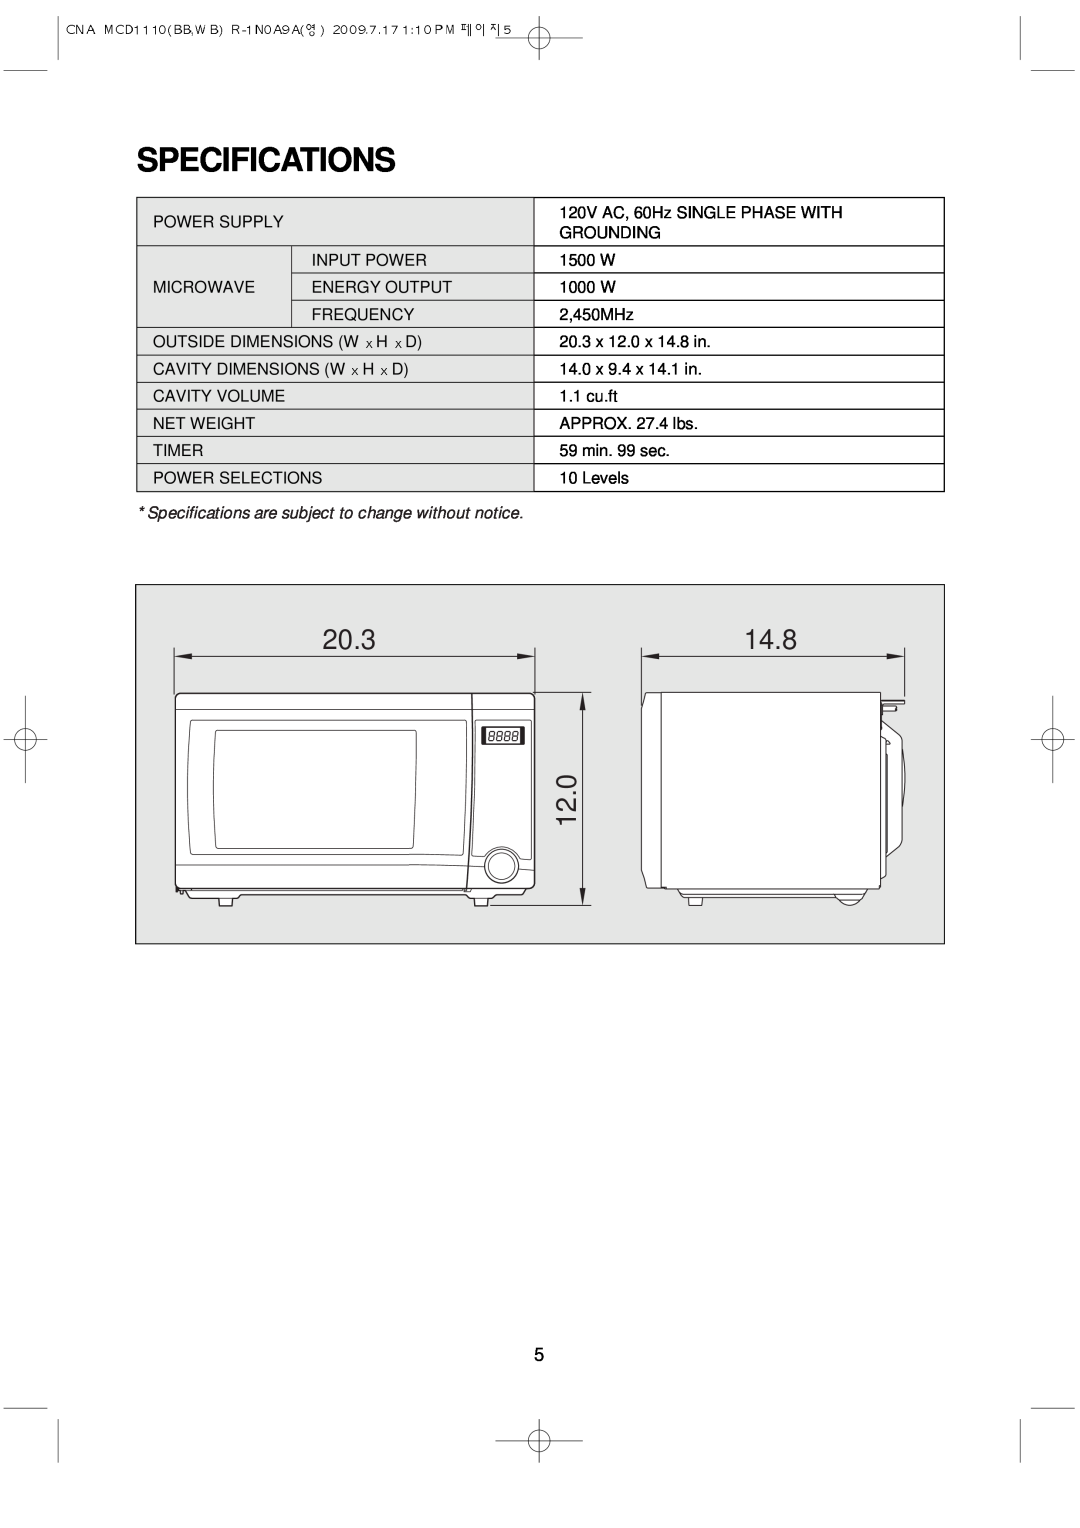 Magic Chef MCD1110WB manual Specifications, 20.3, 14.8, 12.0 